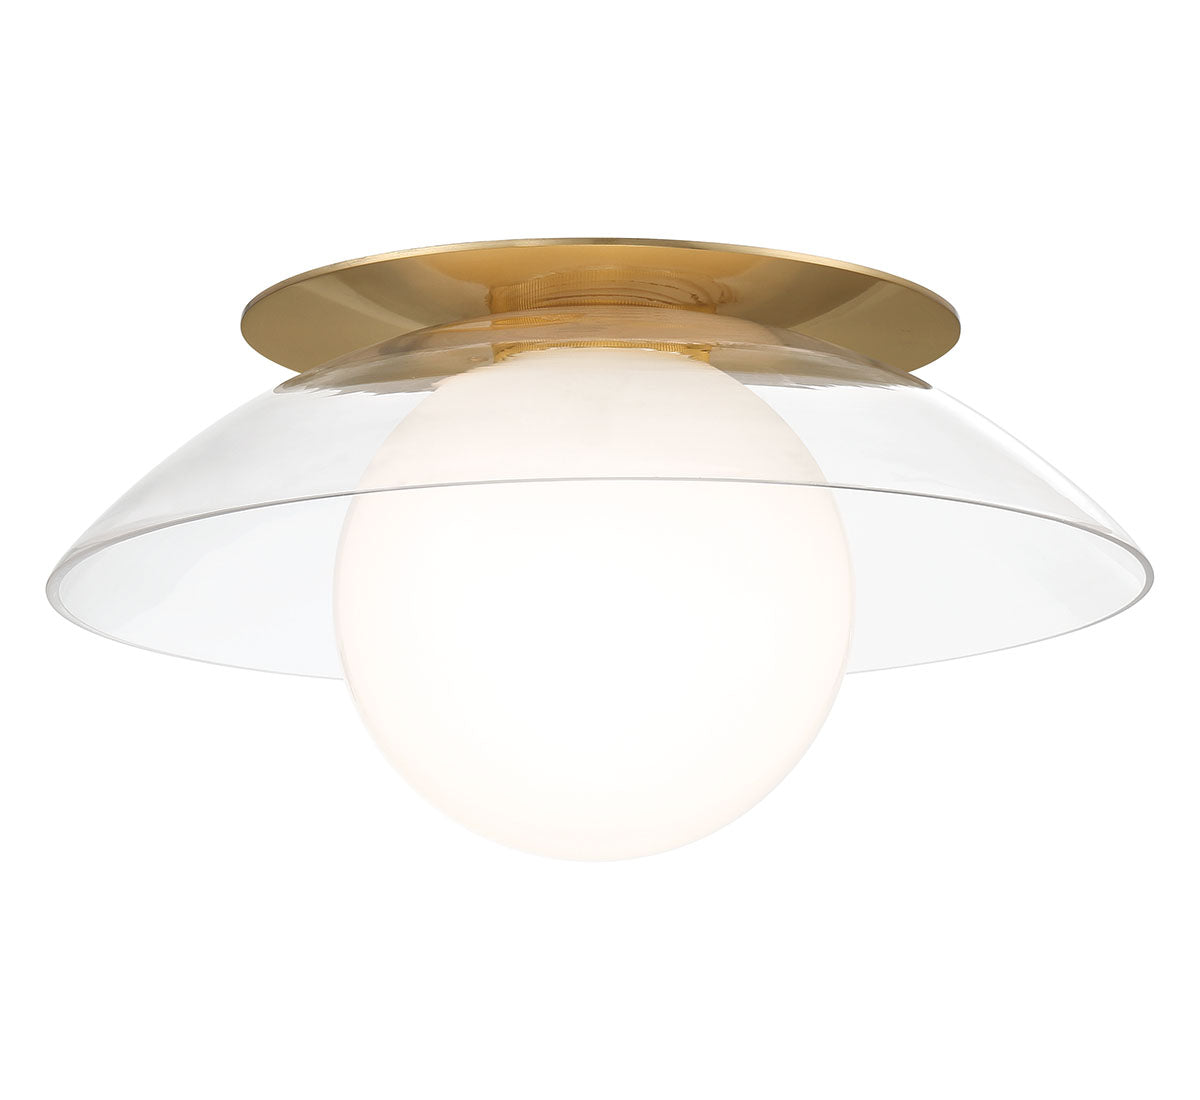 ANCONA 10124-01, Large 1 Light Ceiling / Wall Mount